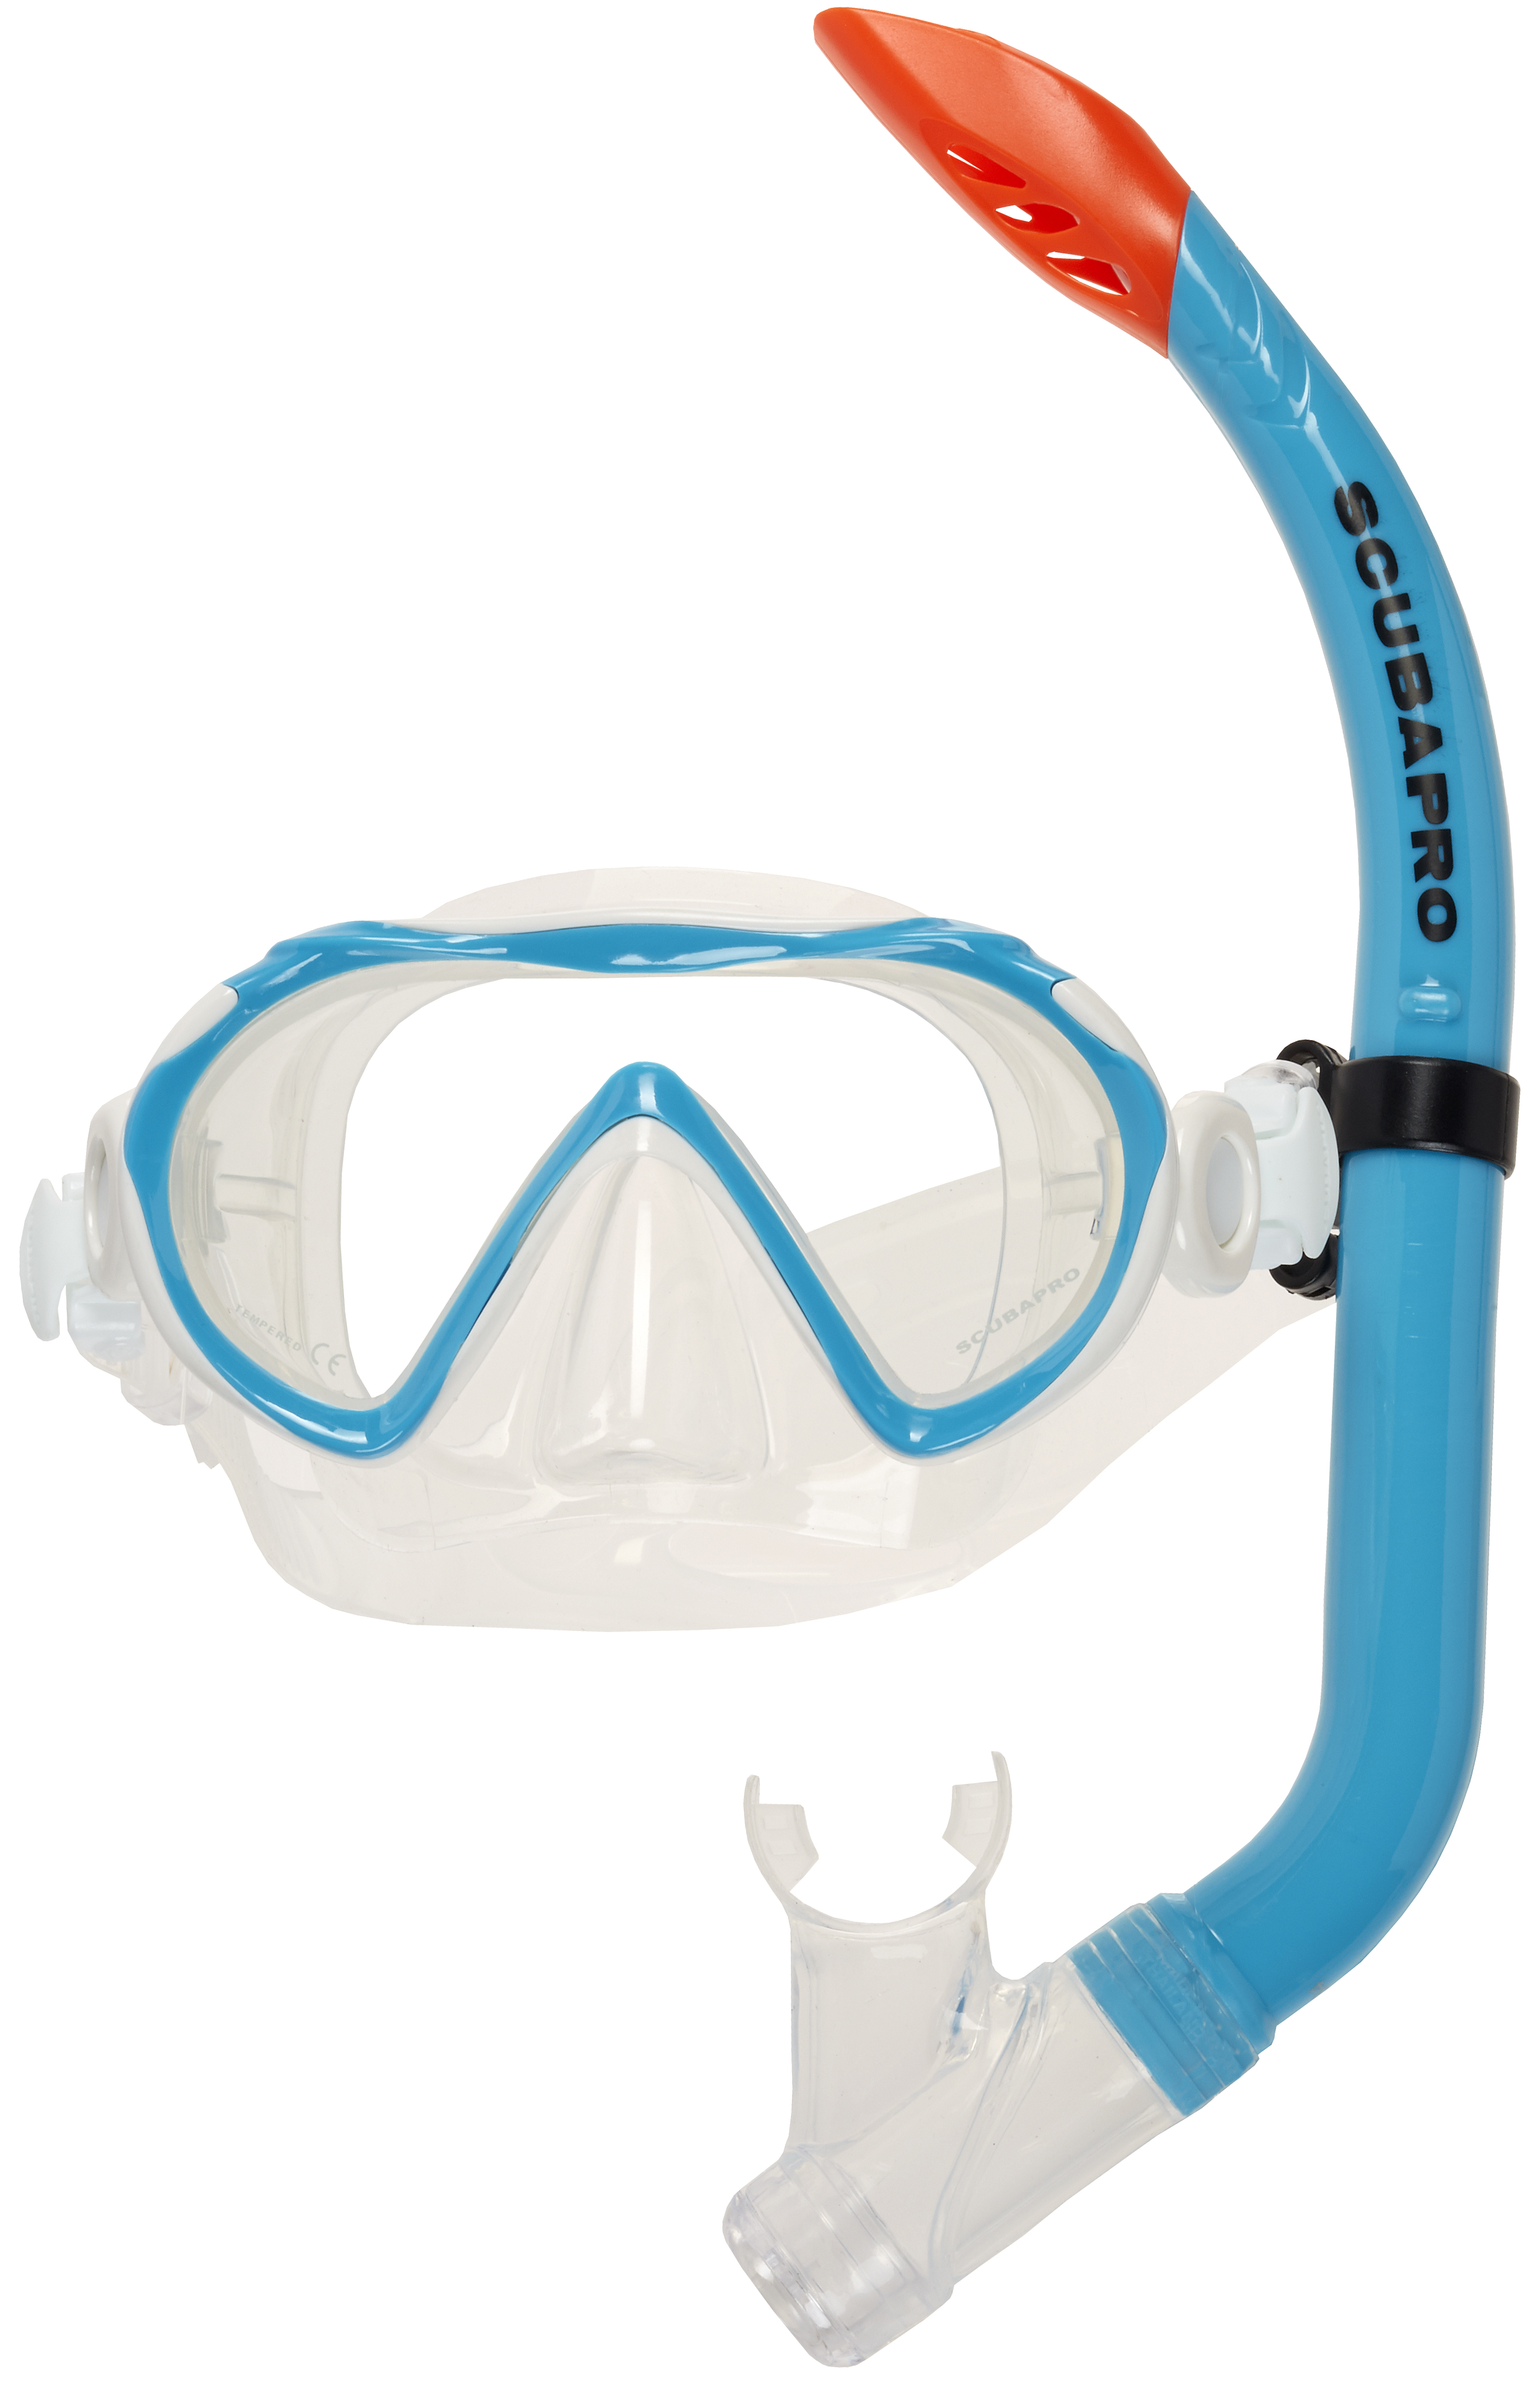 Anti-Fog Diving Mask and Dry Top Snorkel Combo Set for Junior and Youth Gintenco Kids Snorkel Set Snorkeling Gear for Children as Unisex Kids Swimming Goggles 